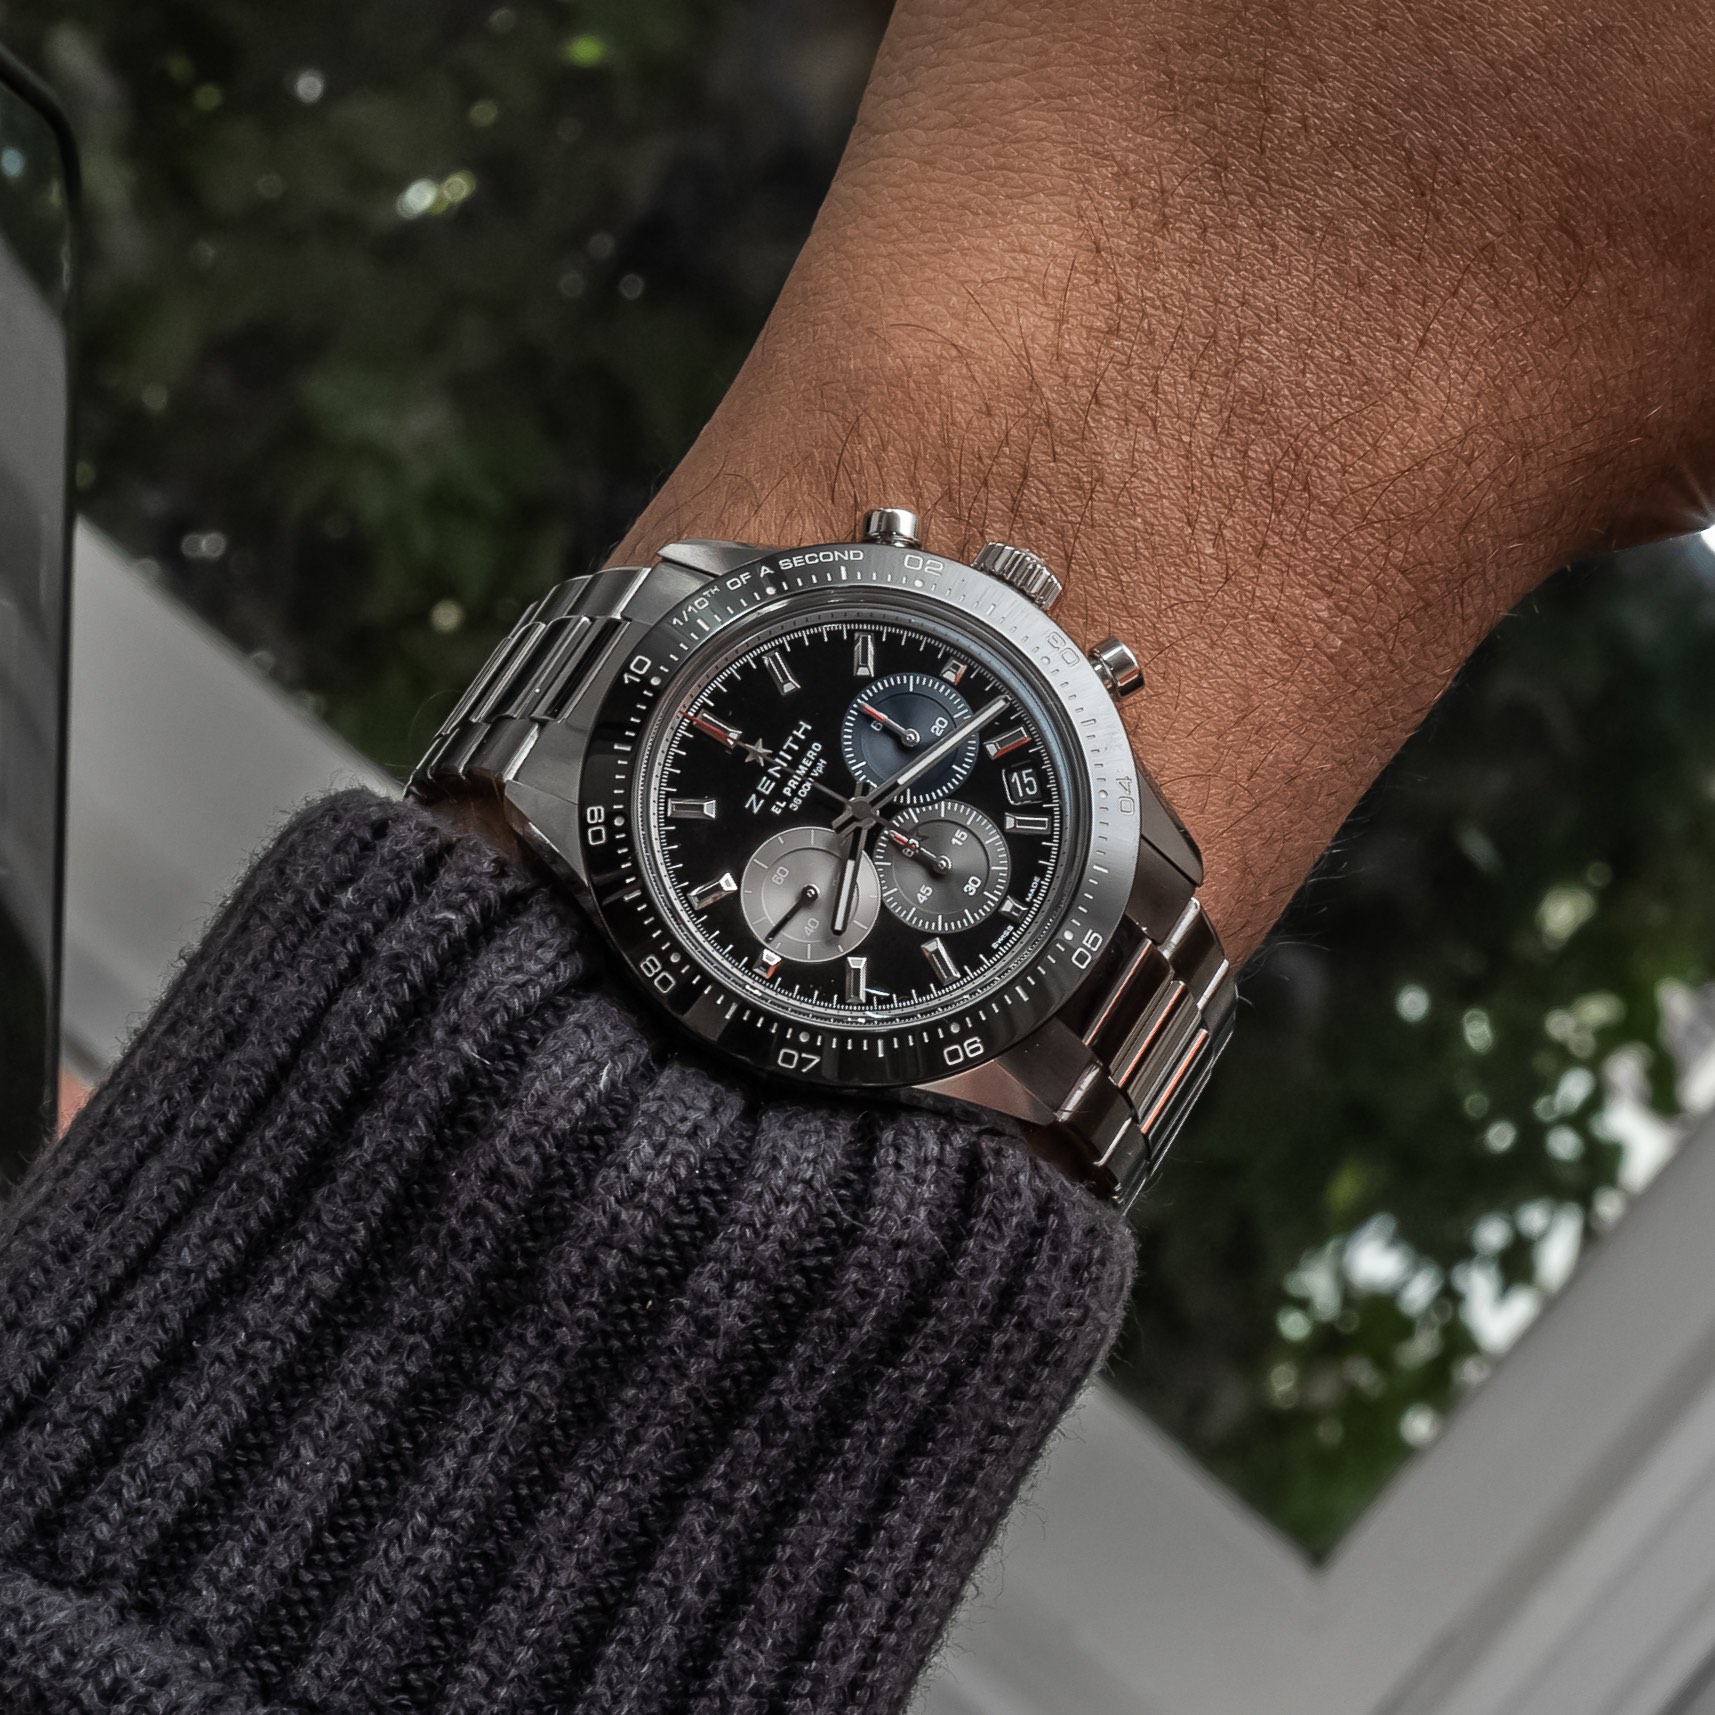 Why You Were Wrong About The Zenith Chronomaster Sport